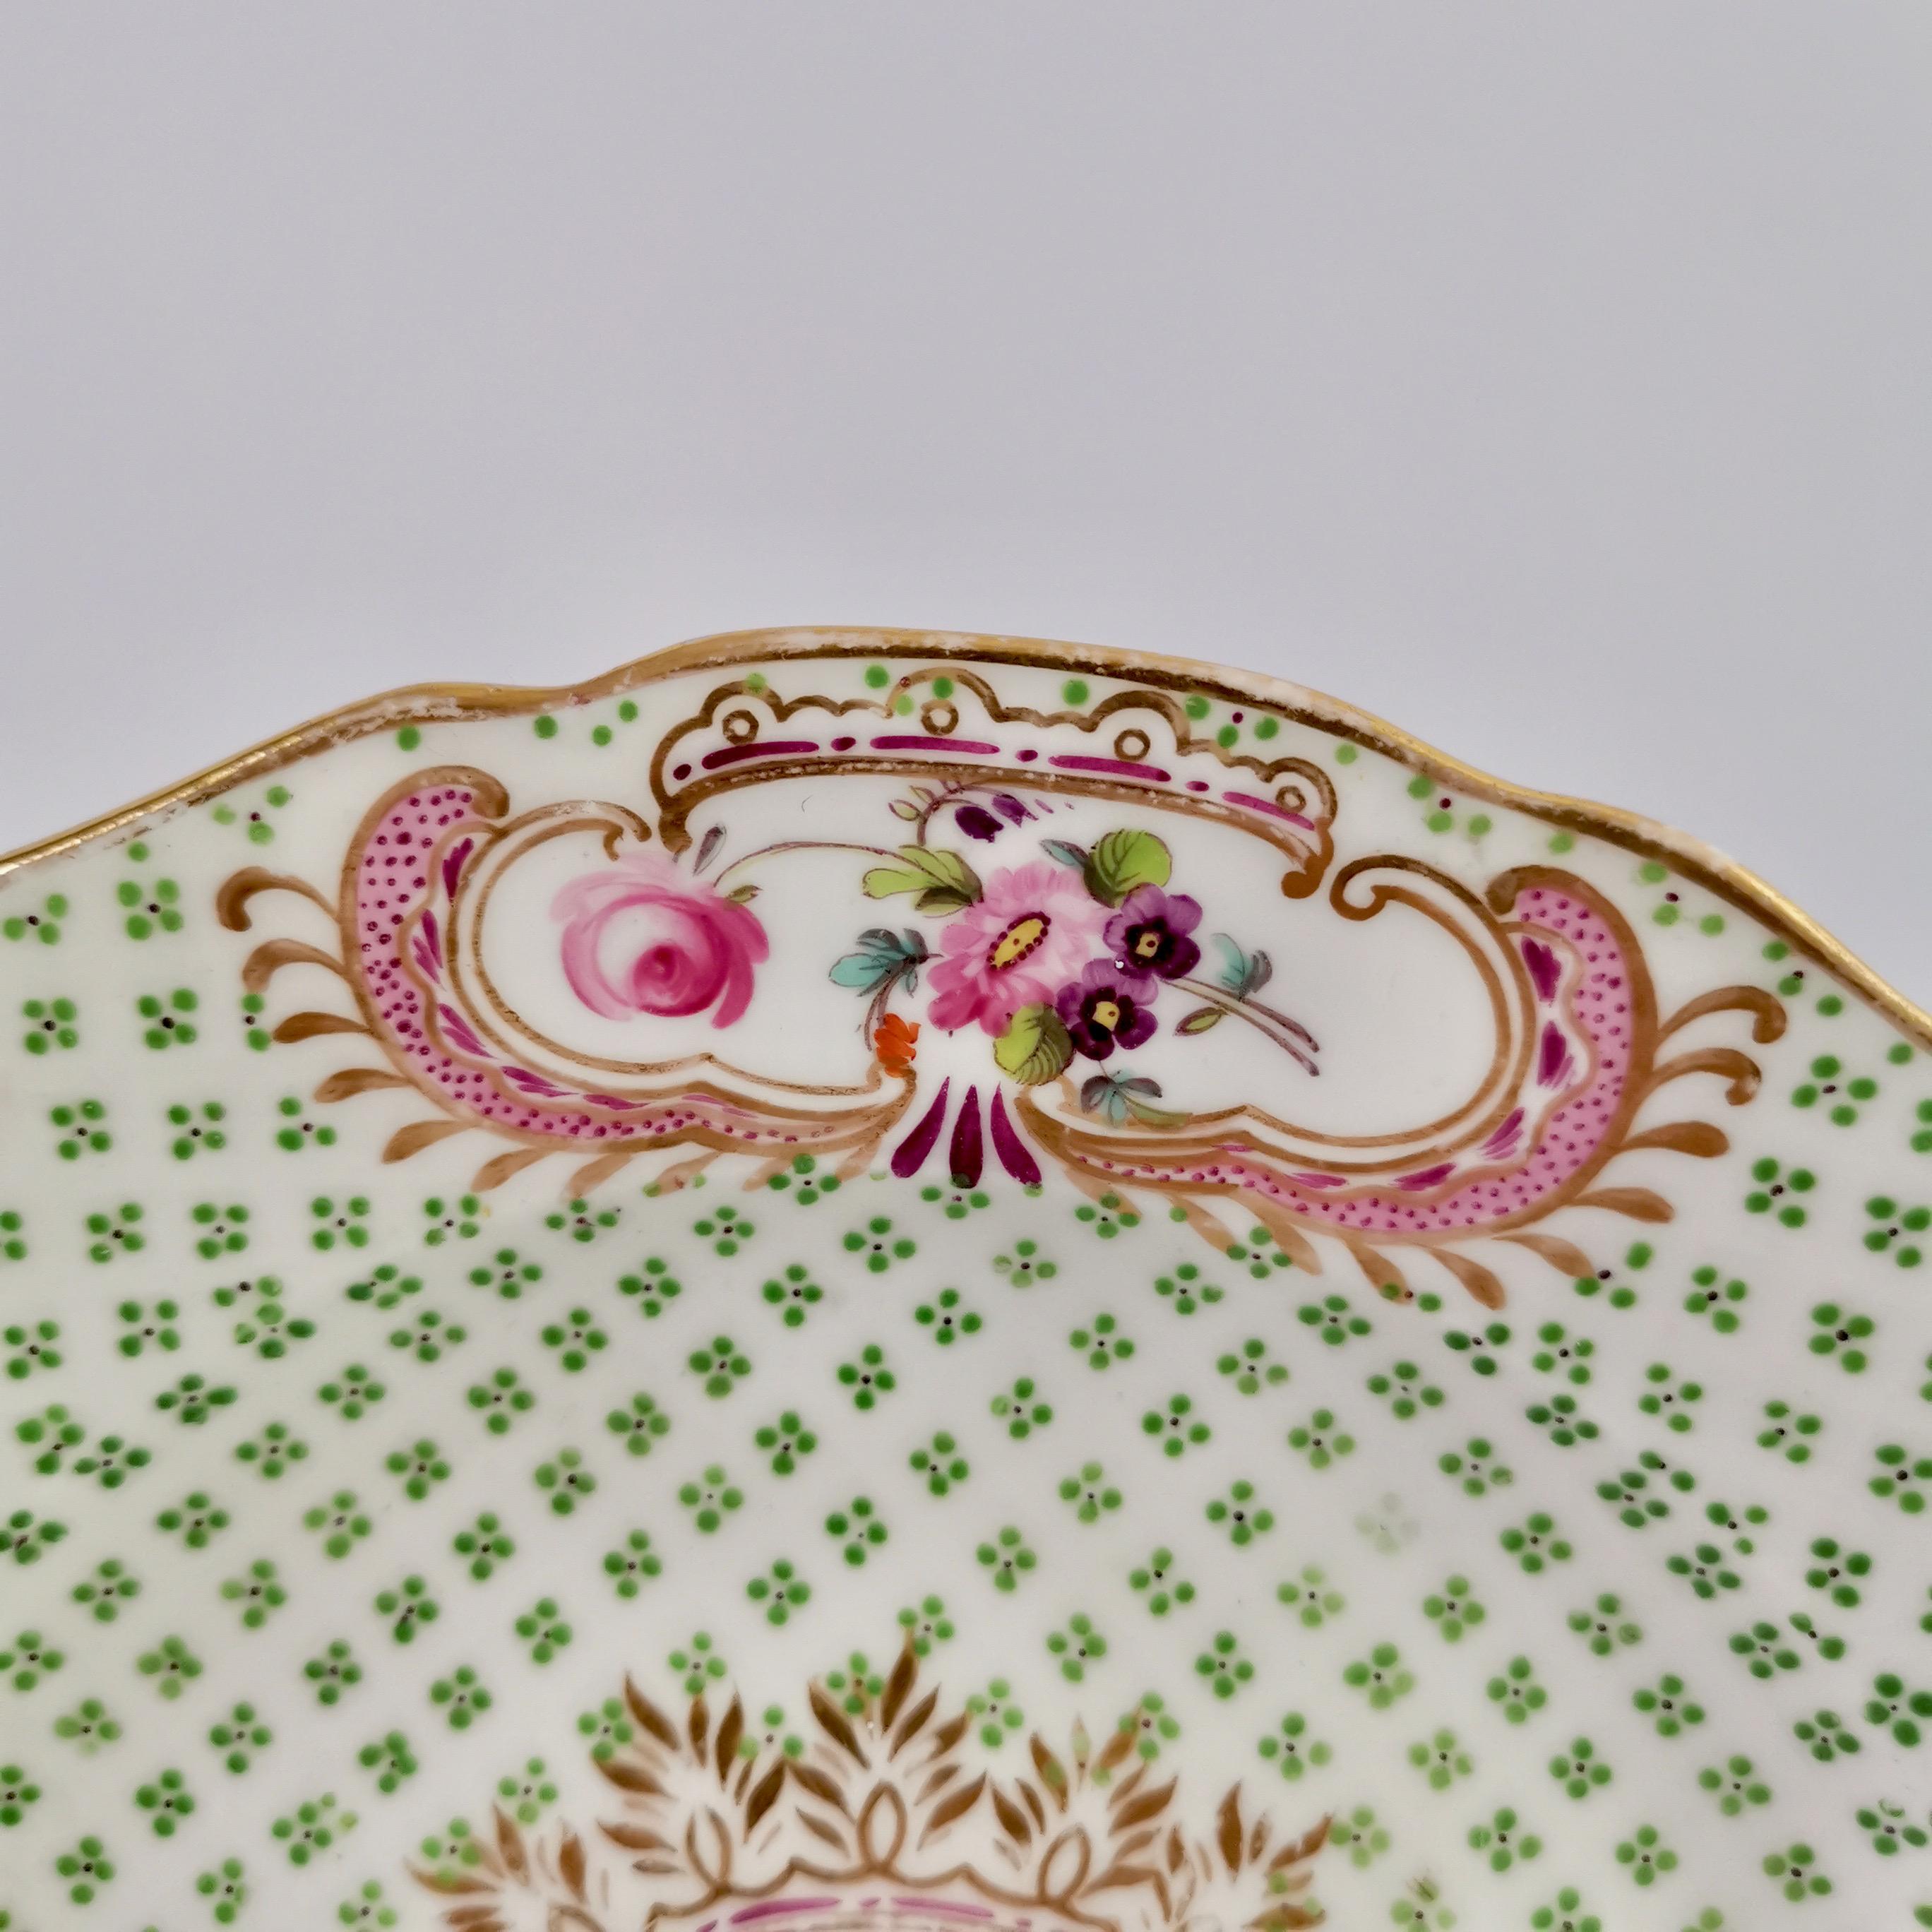 Hand-Painted Coalport Small Porcelain Plate, Green and Gilt, Flowers, Regency, circa 1820